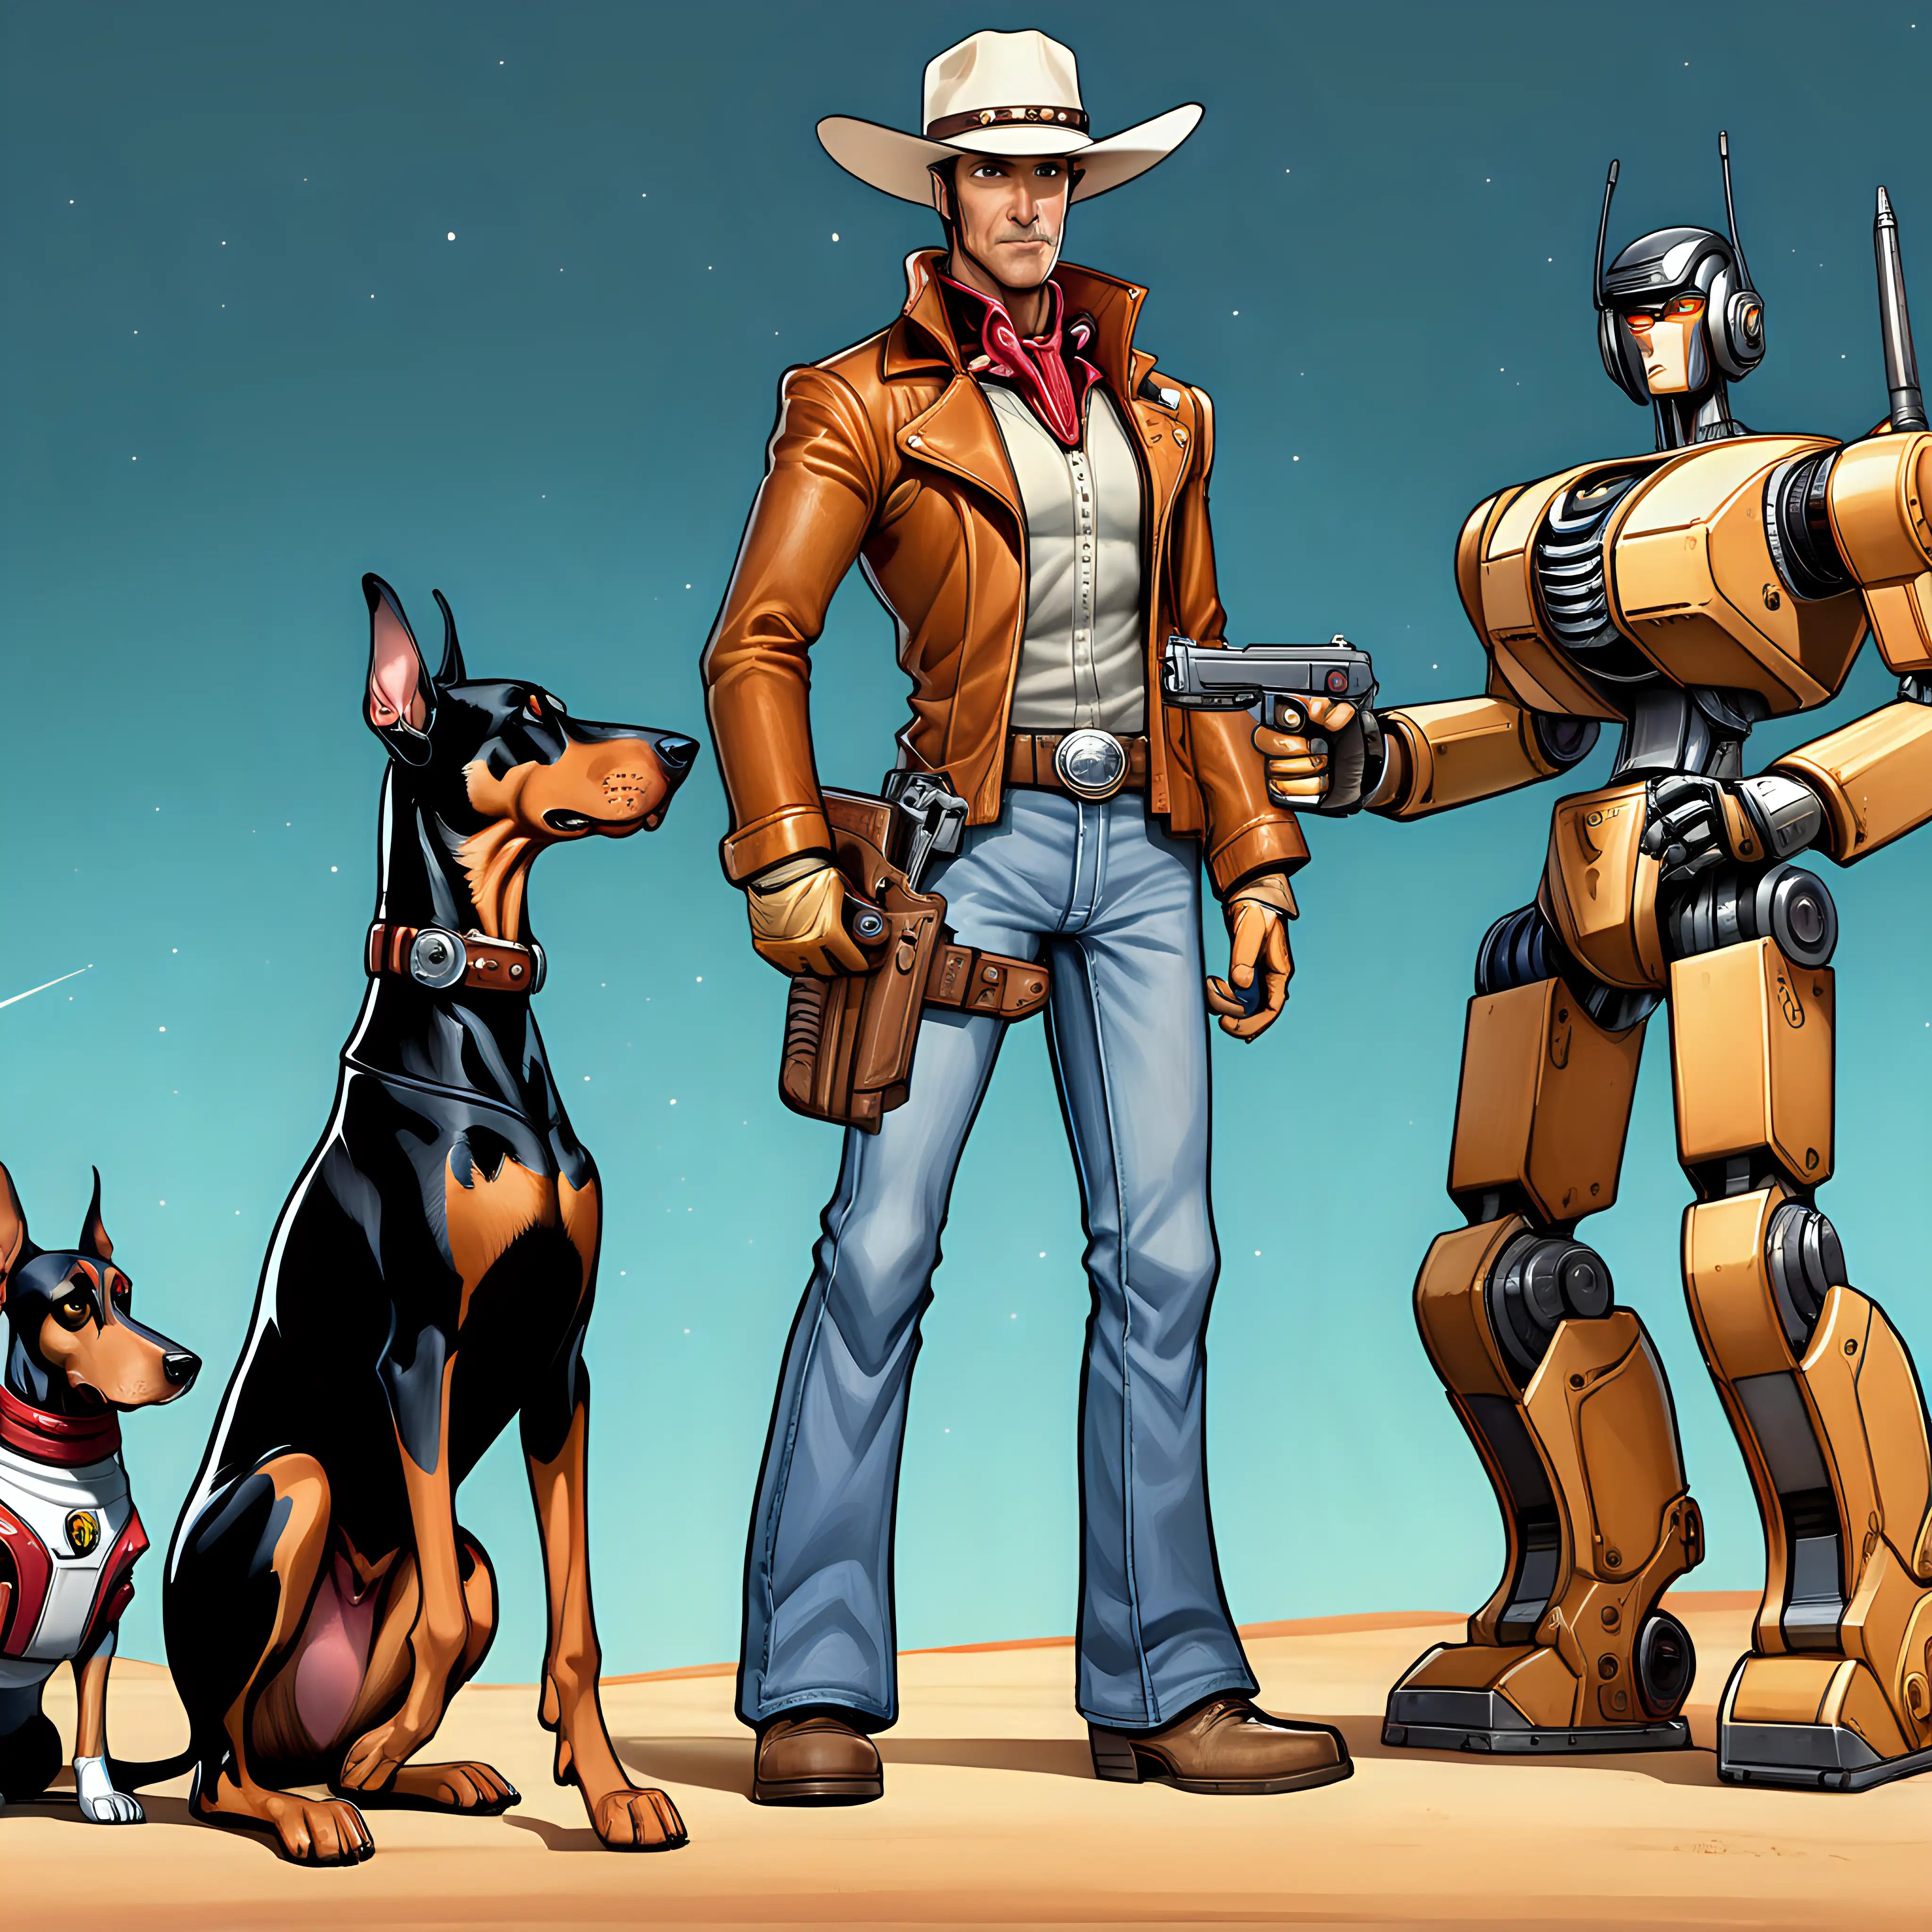 Futuristic Space Cowboy and Robot Duo with Doberman and Corvette